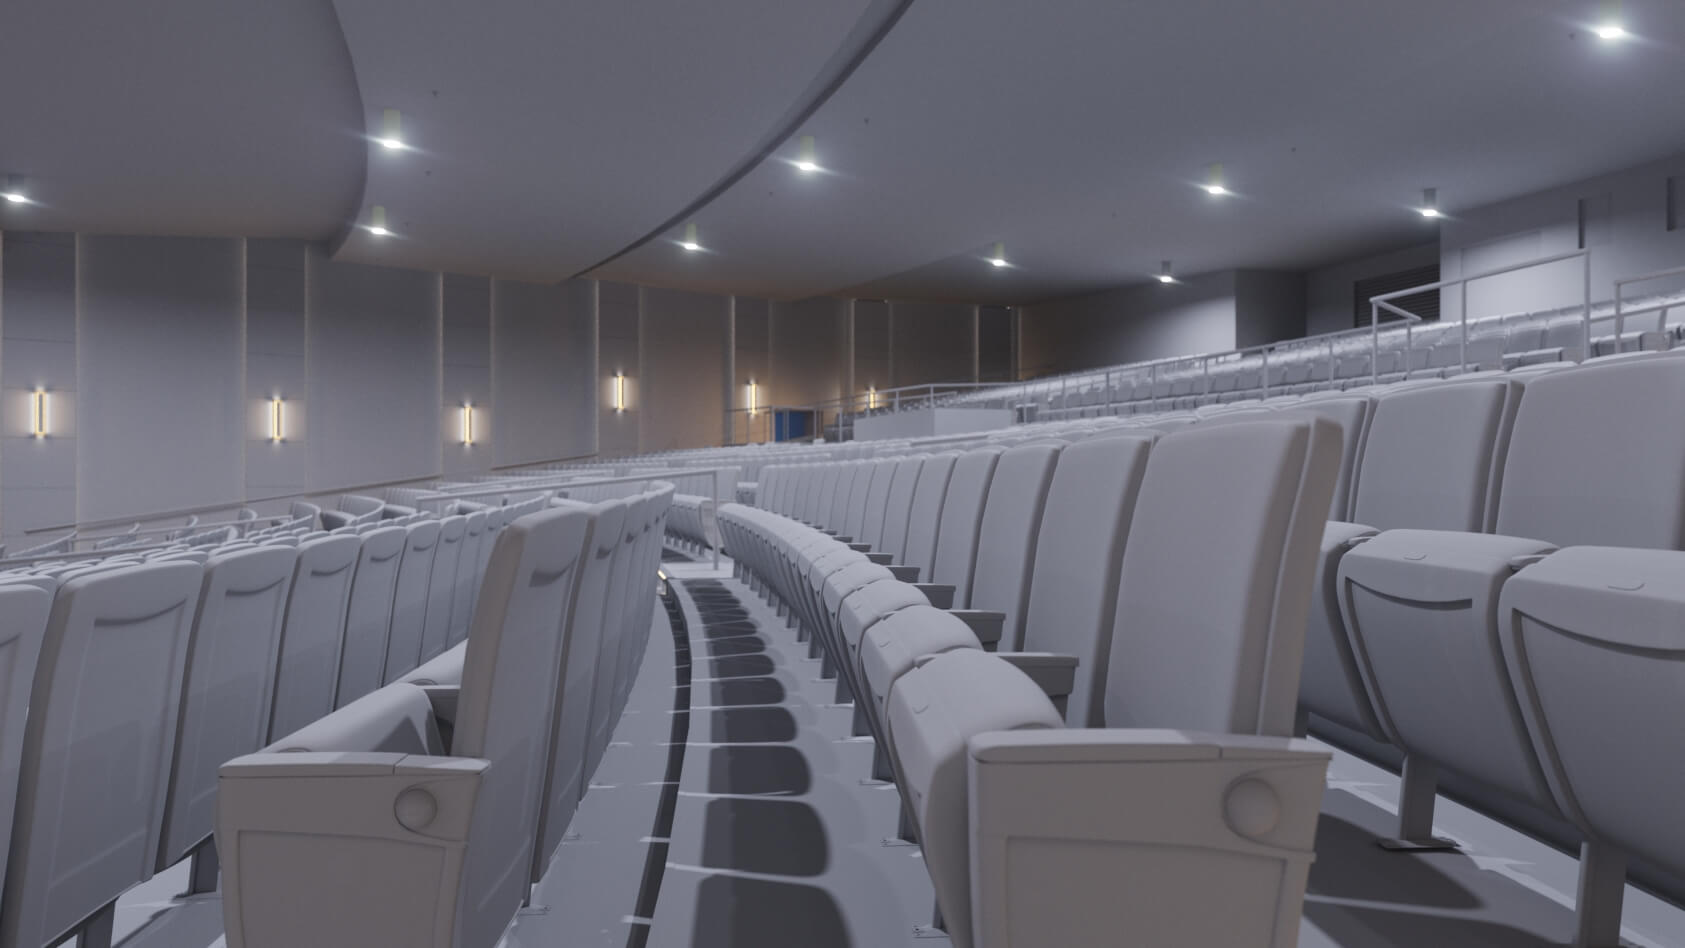 Side View on Chairs for Theater 3D Animation